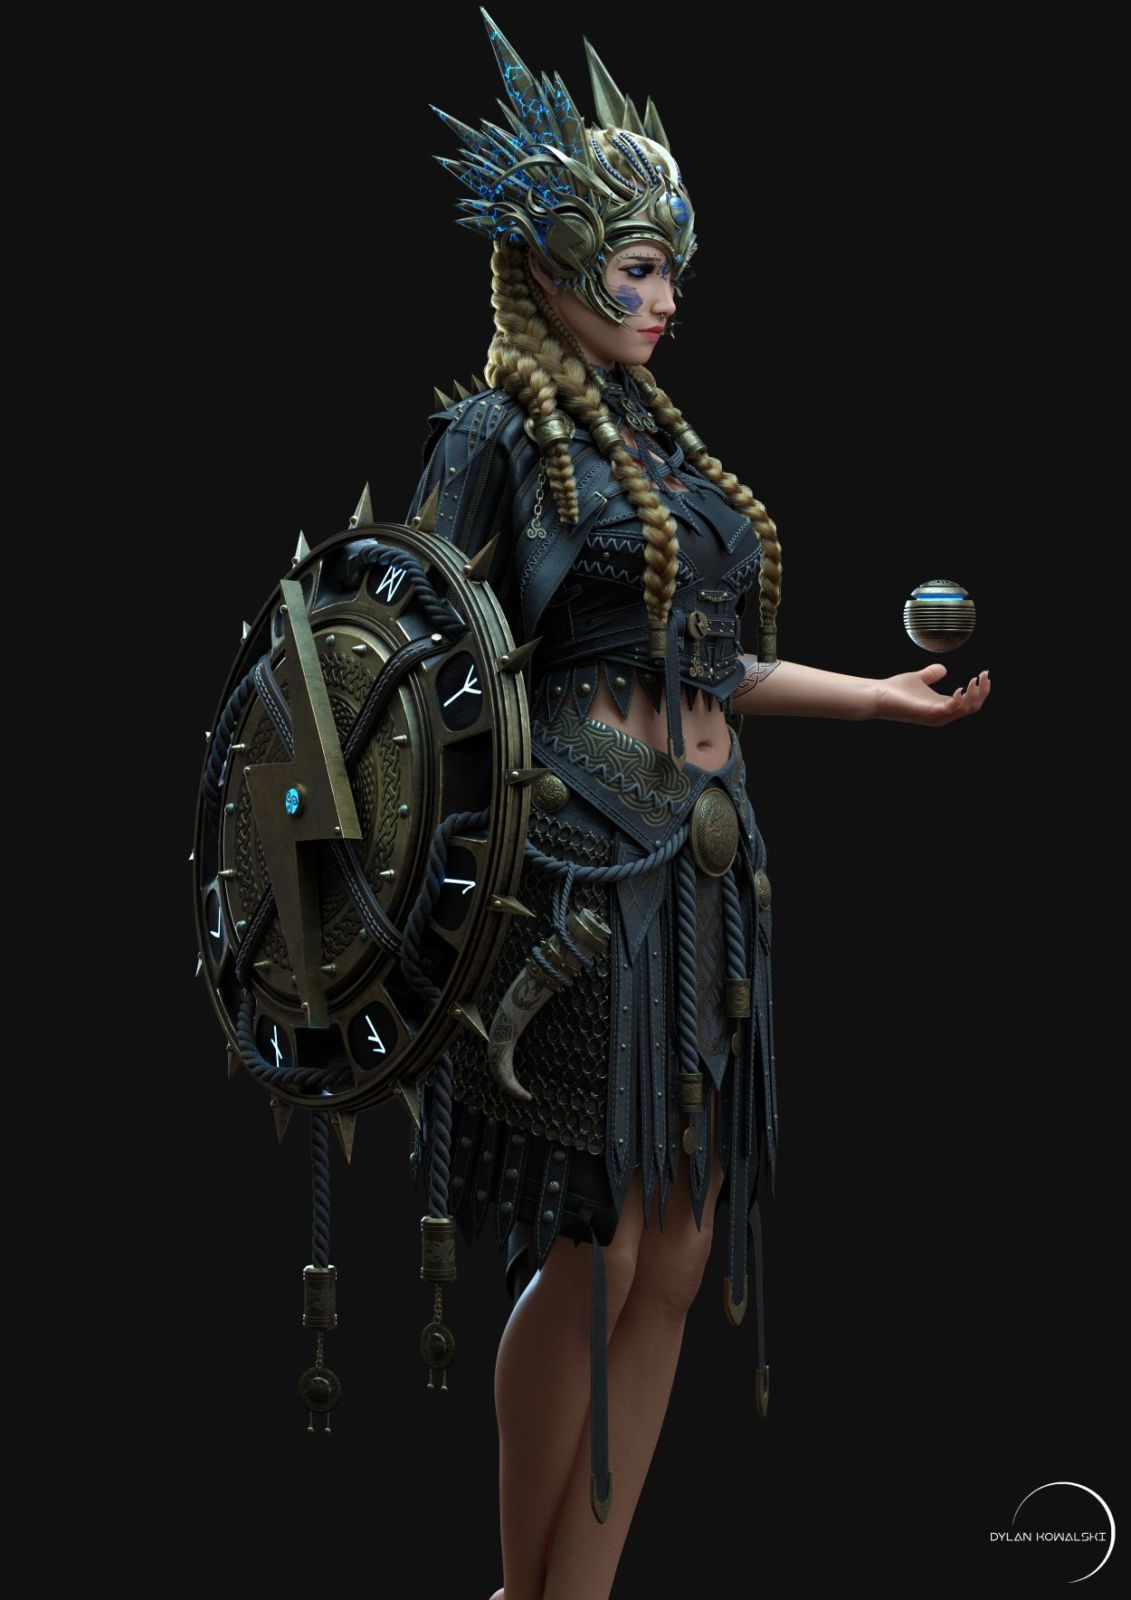 3d model character design valkyrie by dylan kowalski